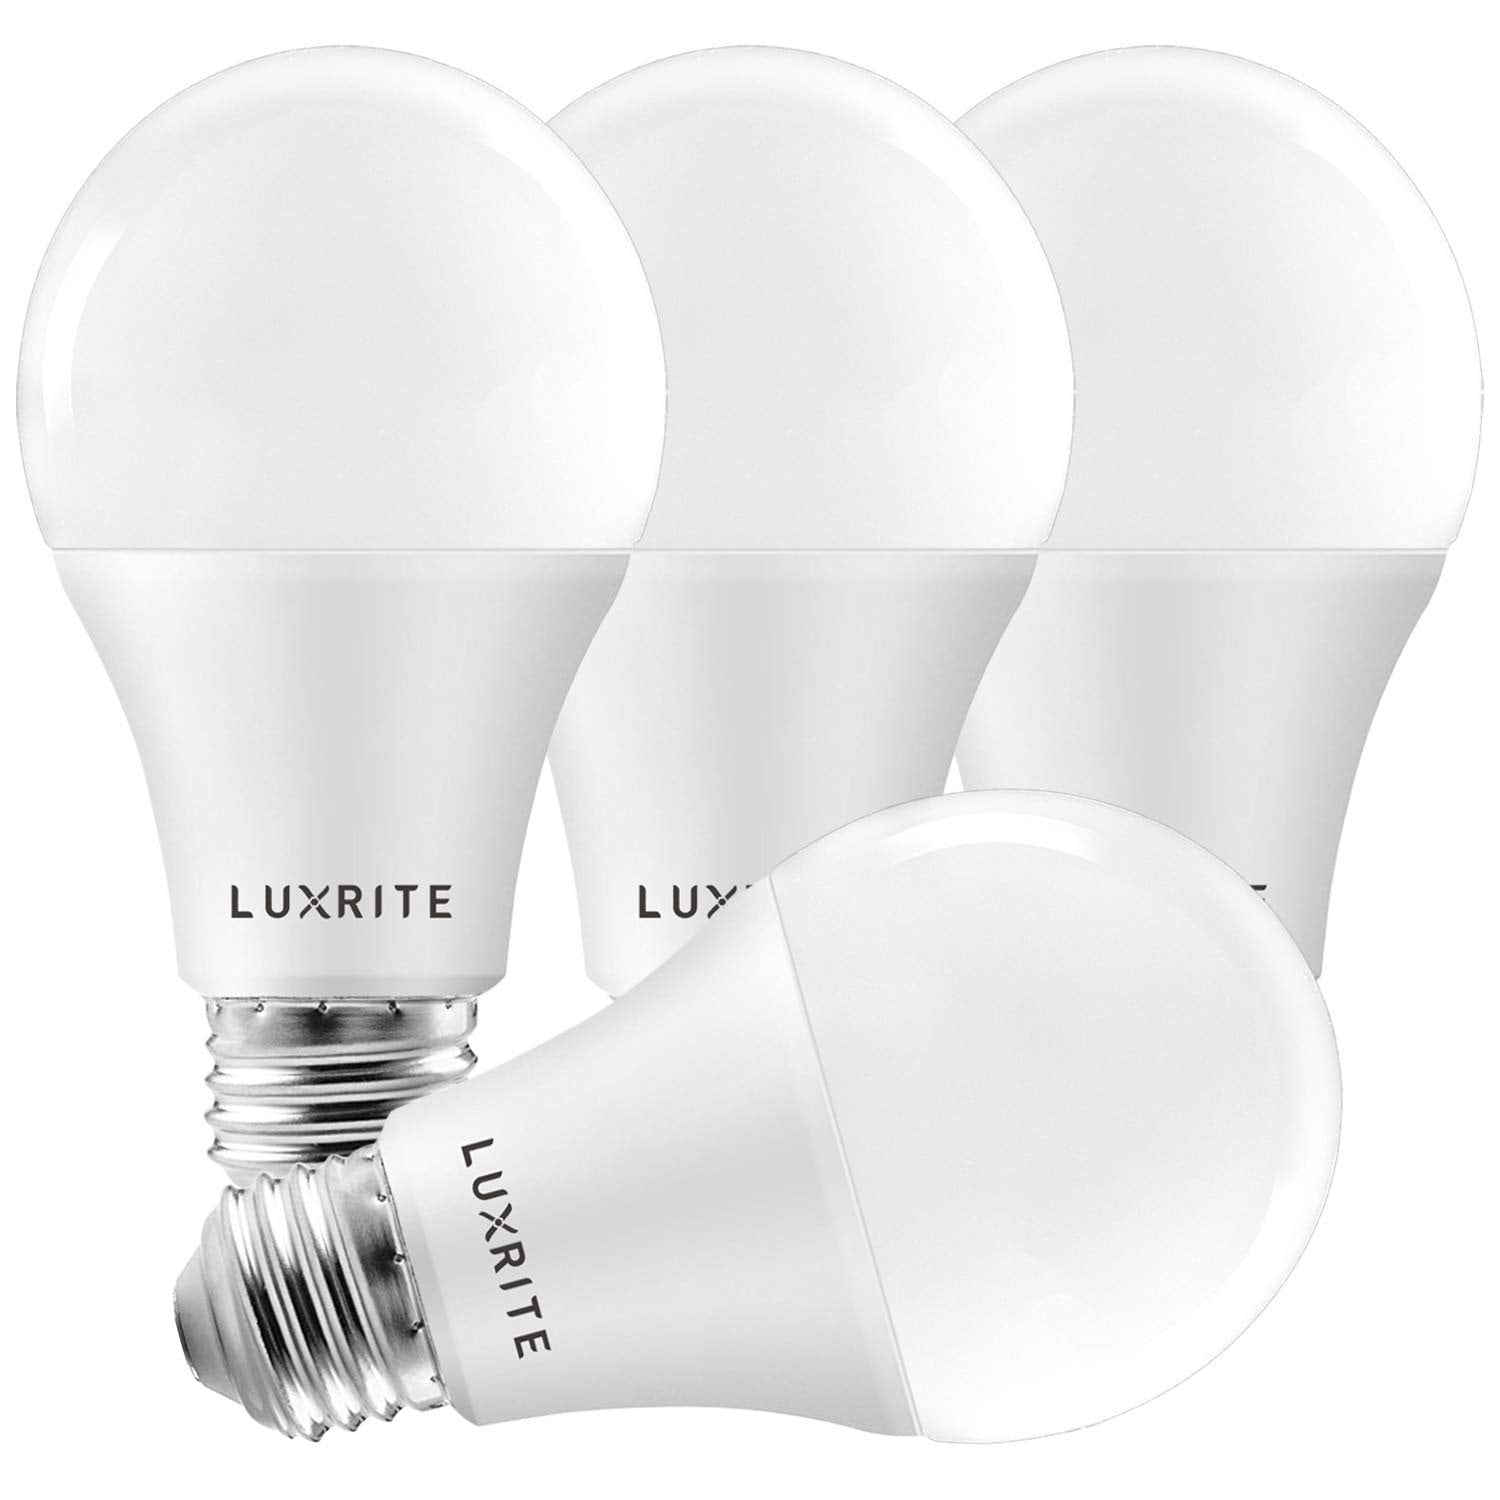 Luxrite A19 LED Light Bulbs 100W Equivalent Dimmable, 1600 Lumens, Enclosed  Fixture Rated, Energy Star, E26 Base 4-Pack On Sale Bed Bath  Beyond  28797561